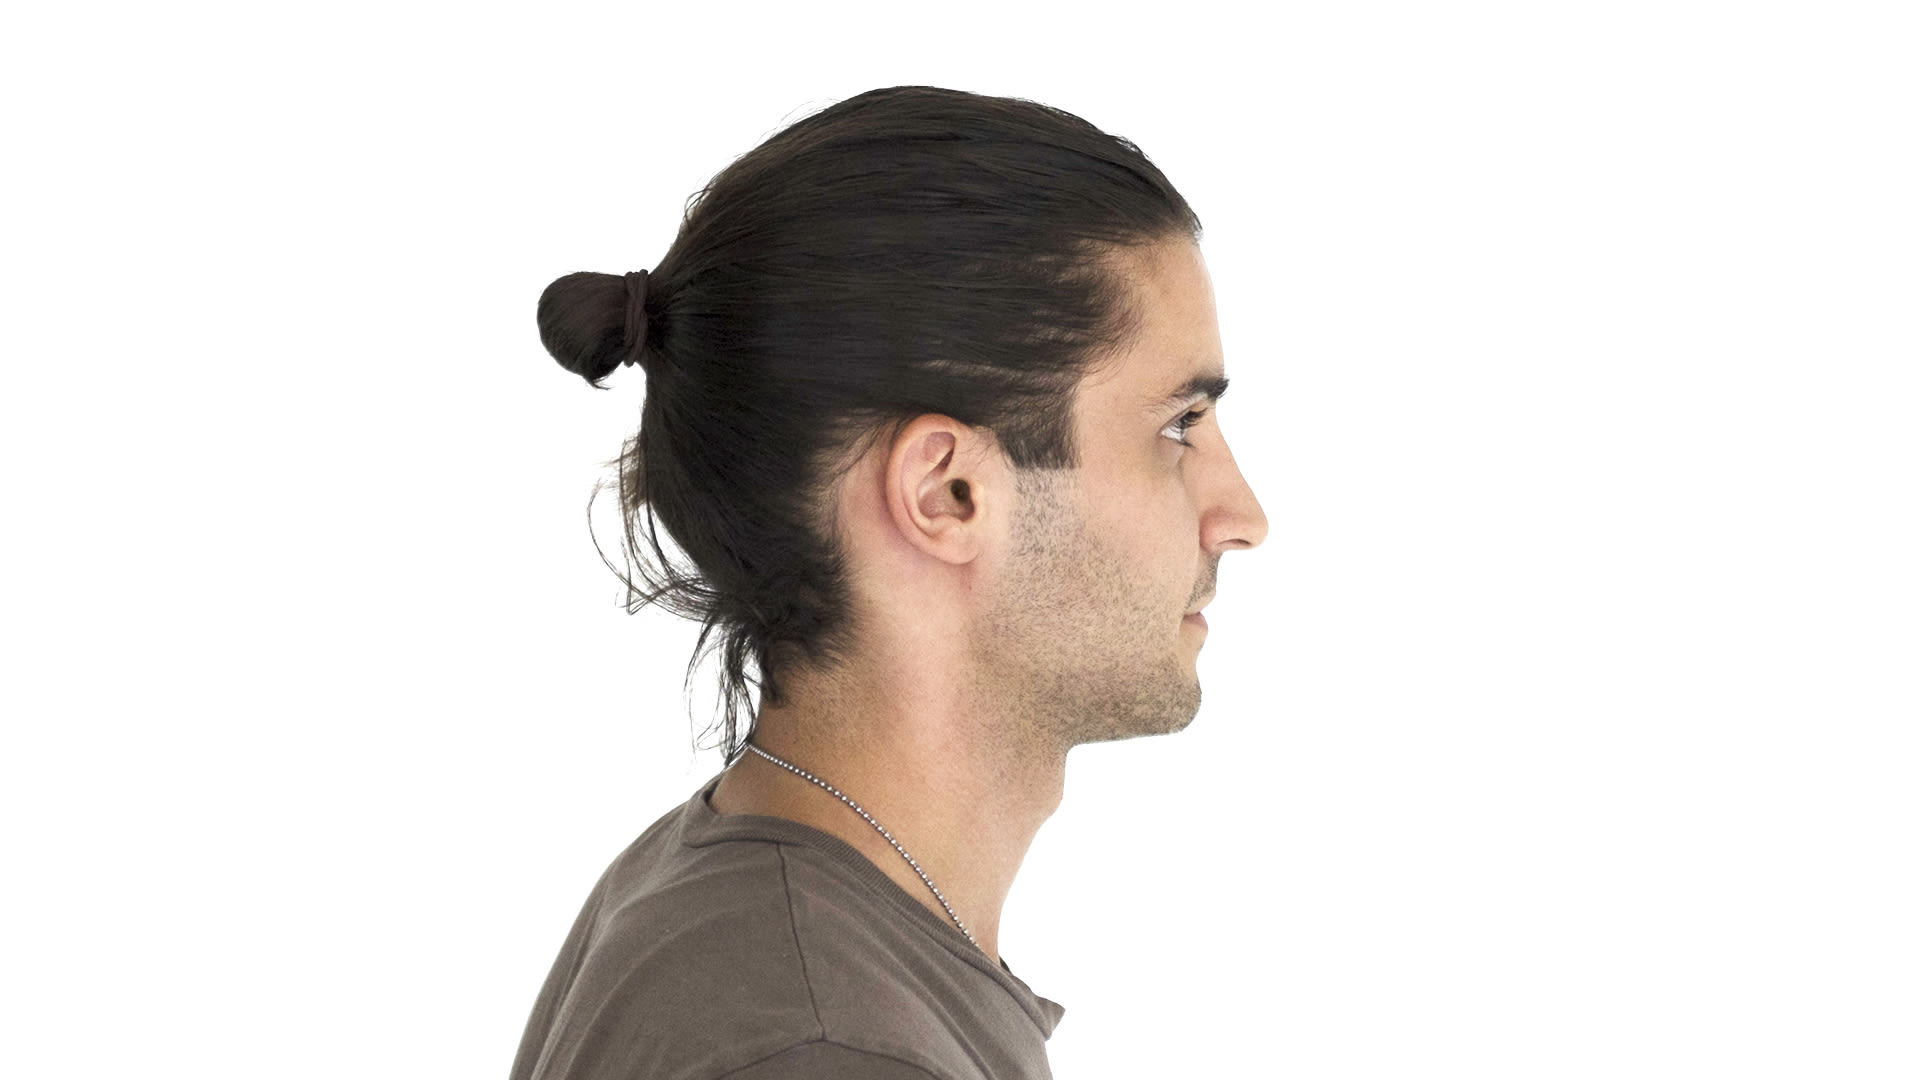 Watch How to Style a Man Bun | Style and How-To | GQ